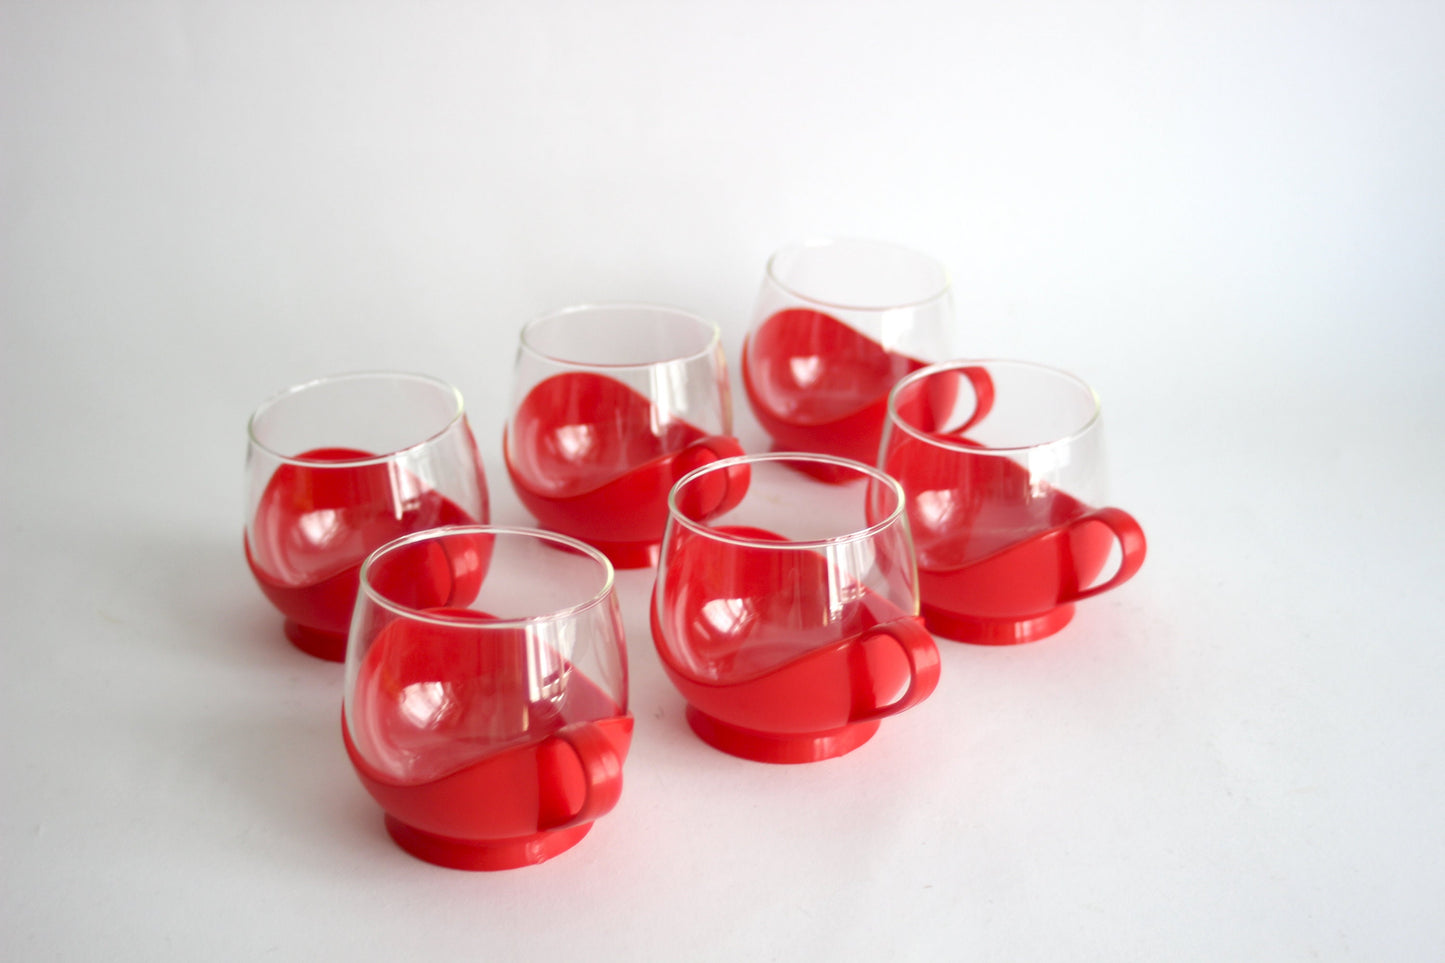 MELITTA GERMANY Set of 6 red glass tumblers for tea or coffee with plastic handles - 60s / 70s